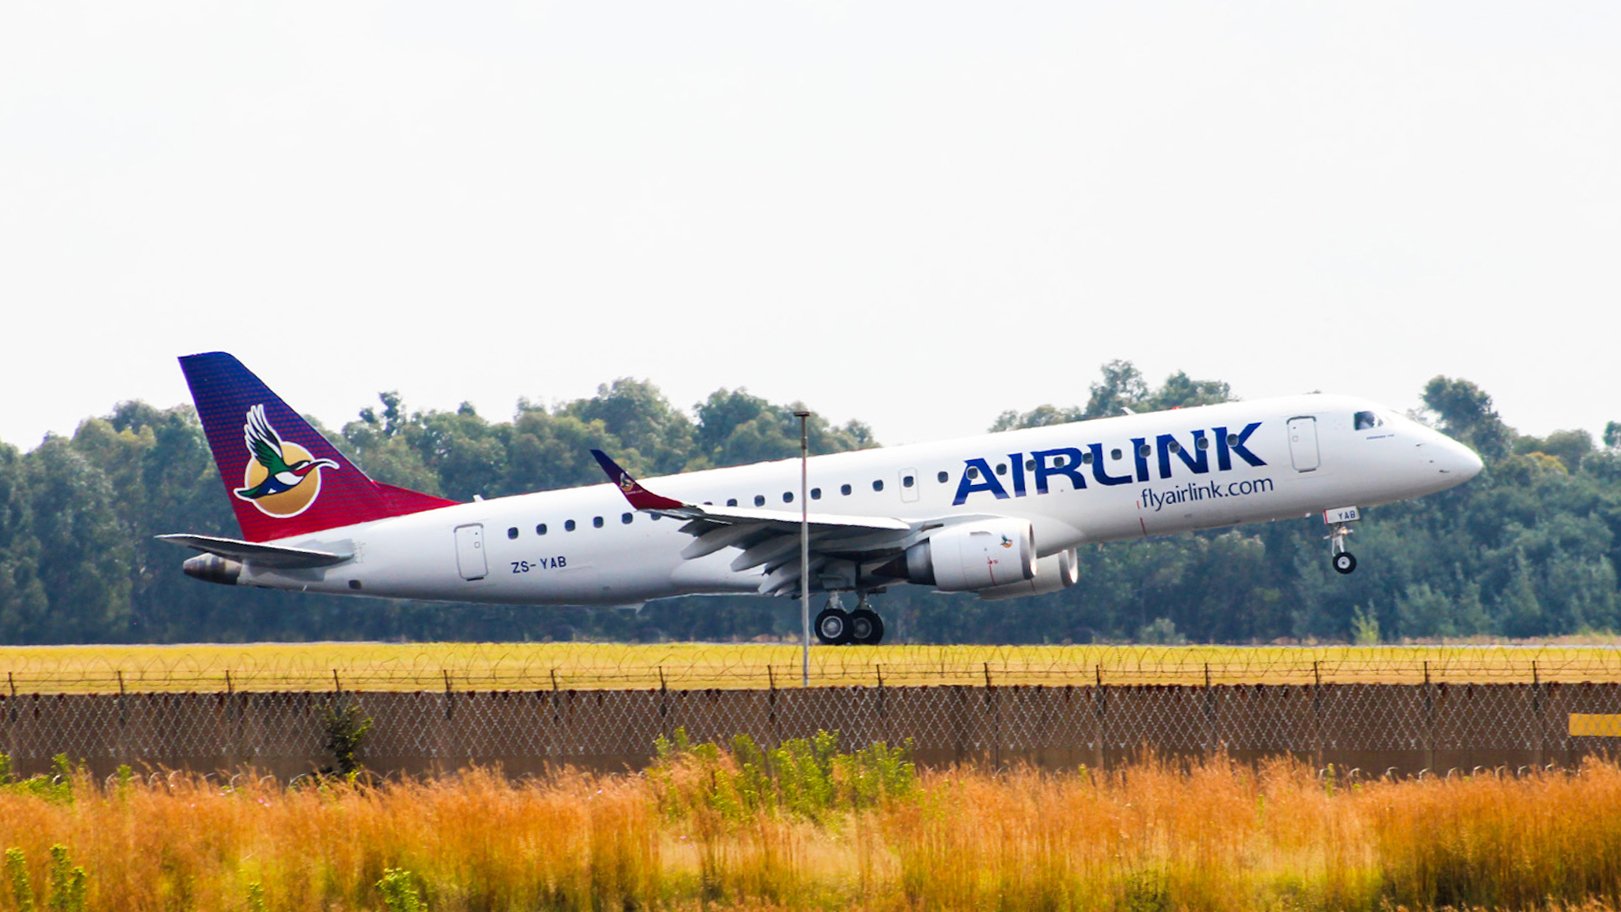 Valentines Day just got better with these flight deals courtesy of Fly Airlink